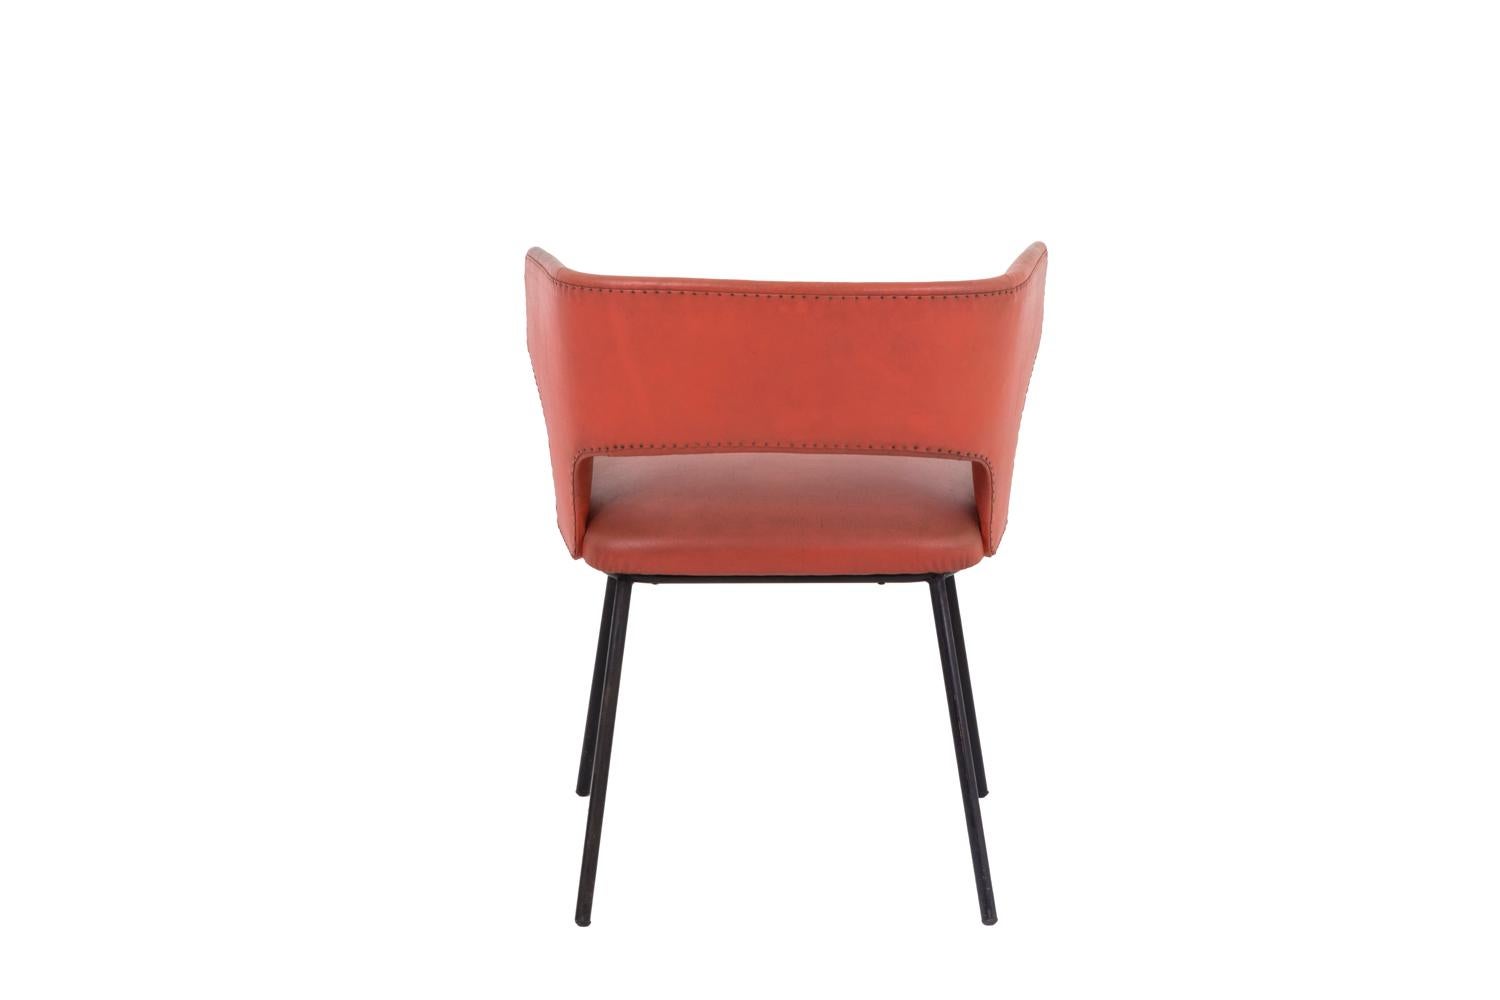 Armchair in Orange Skai and Black Lacquered Metal, 1950s In Good Condition For Sale In Saint-Ouen, FR